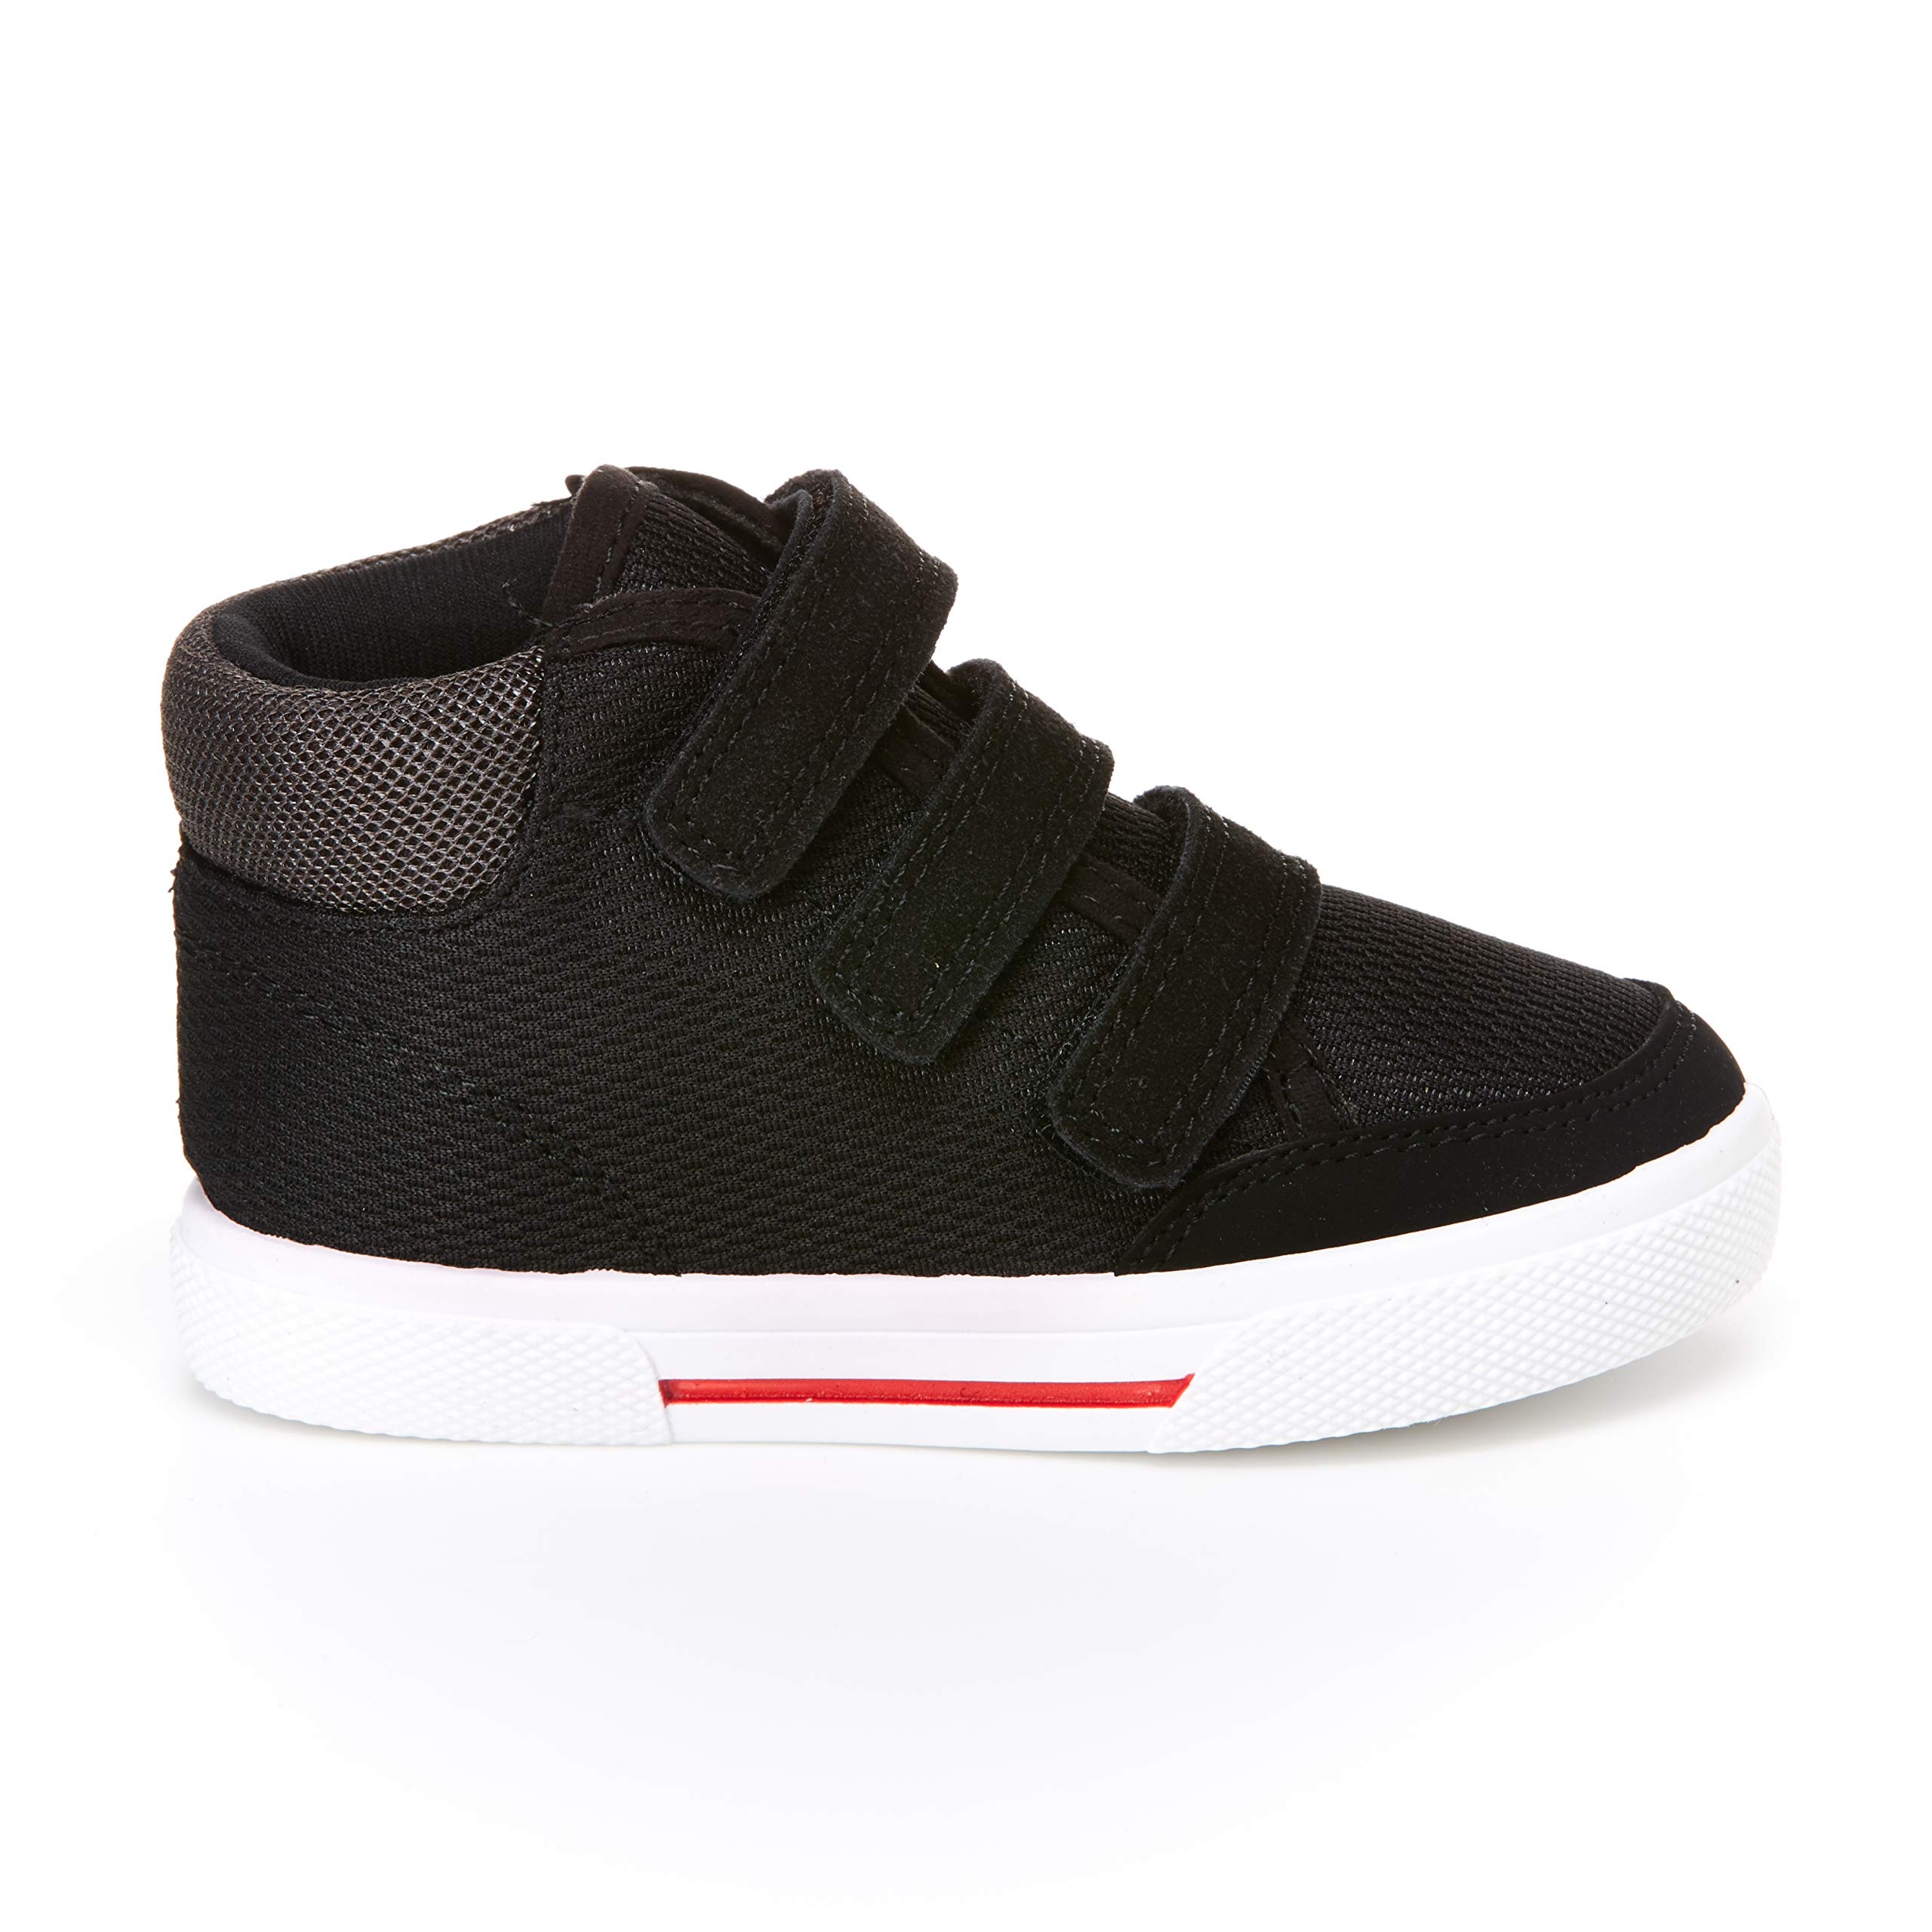 Simple Joys by Carter's Unisex Kids and Toddlers' Daniel High-Top Sneaker